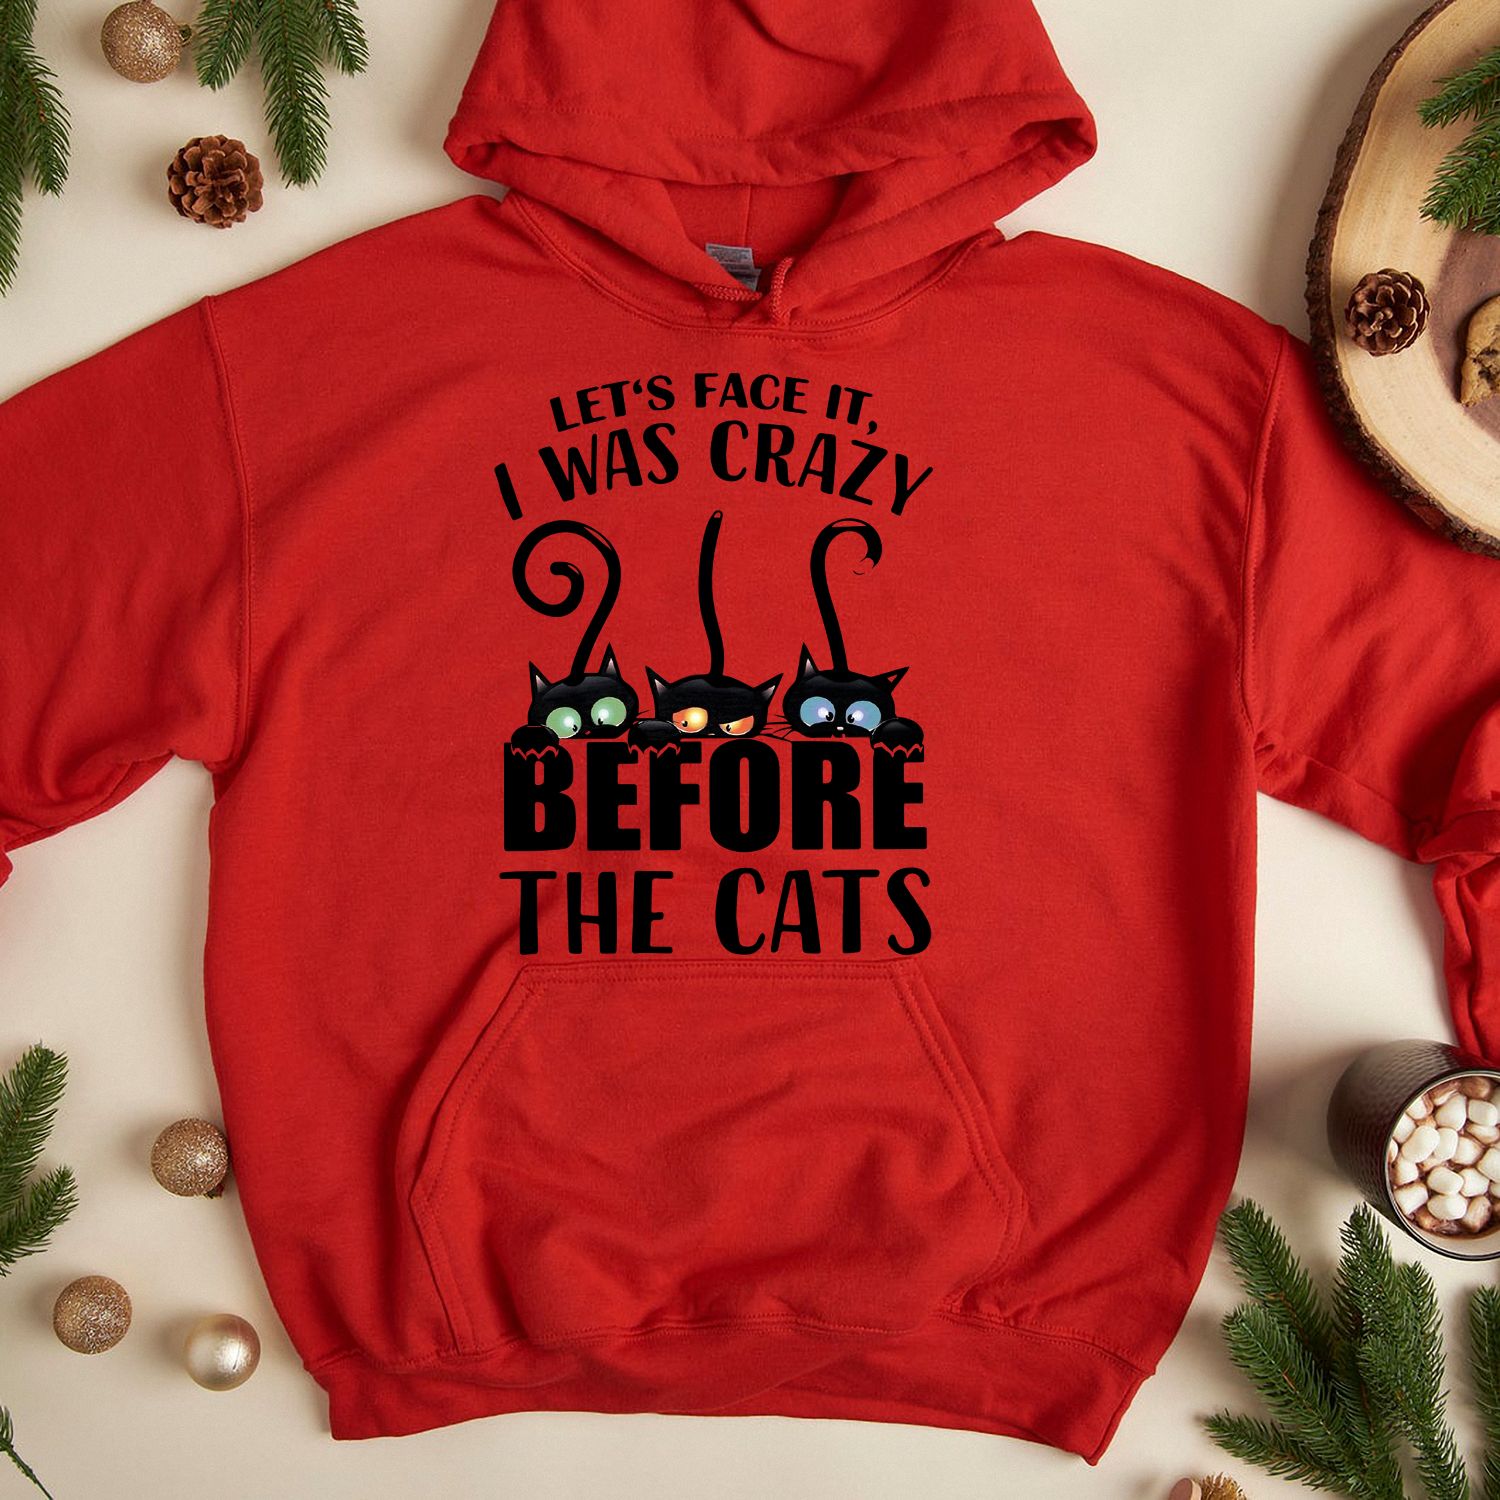 The Cats Standard Hoodie